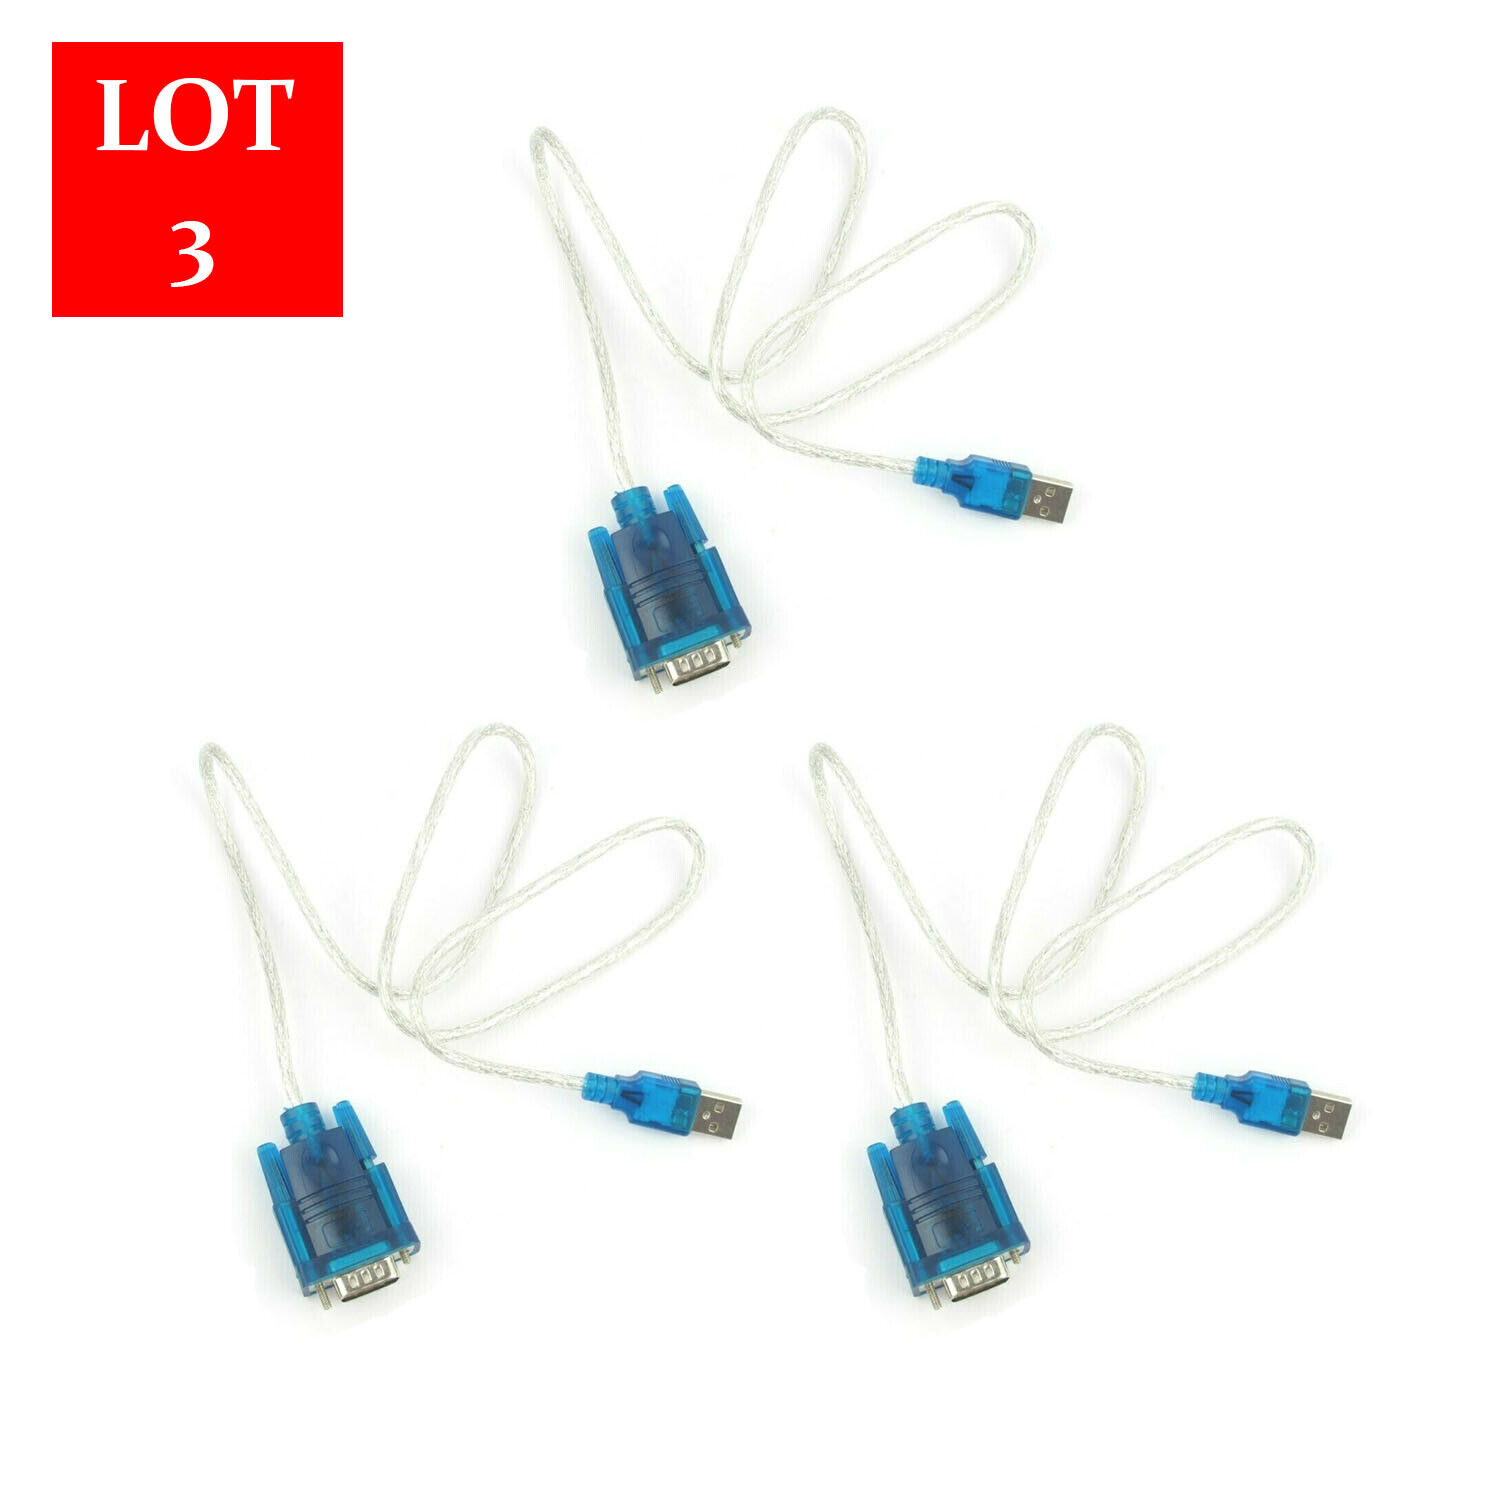 3x 3Ft Translucent USB 2.0 to DB9 RS232 Serial Converter 9 Pin Cable PDA Unbranded Does not apply